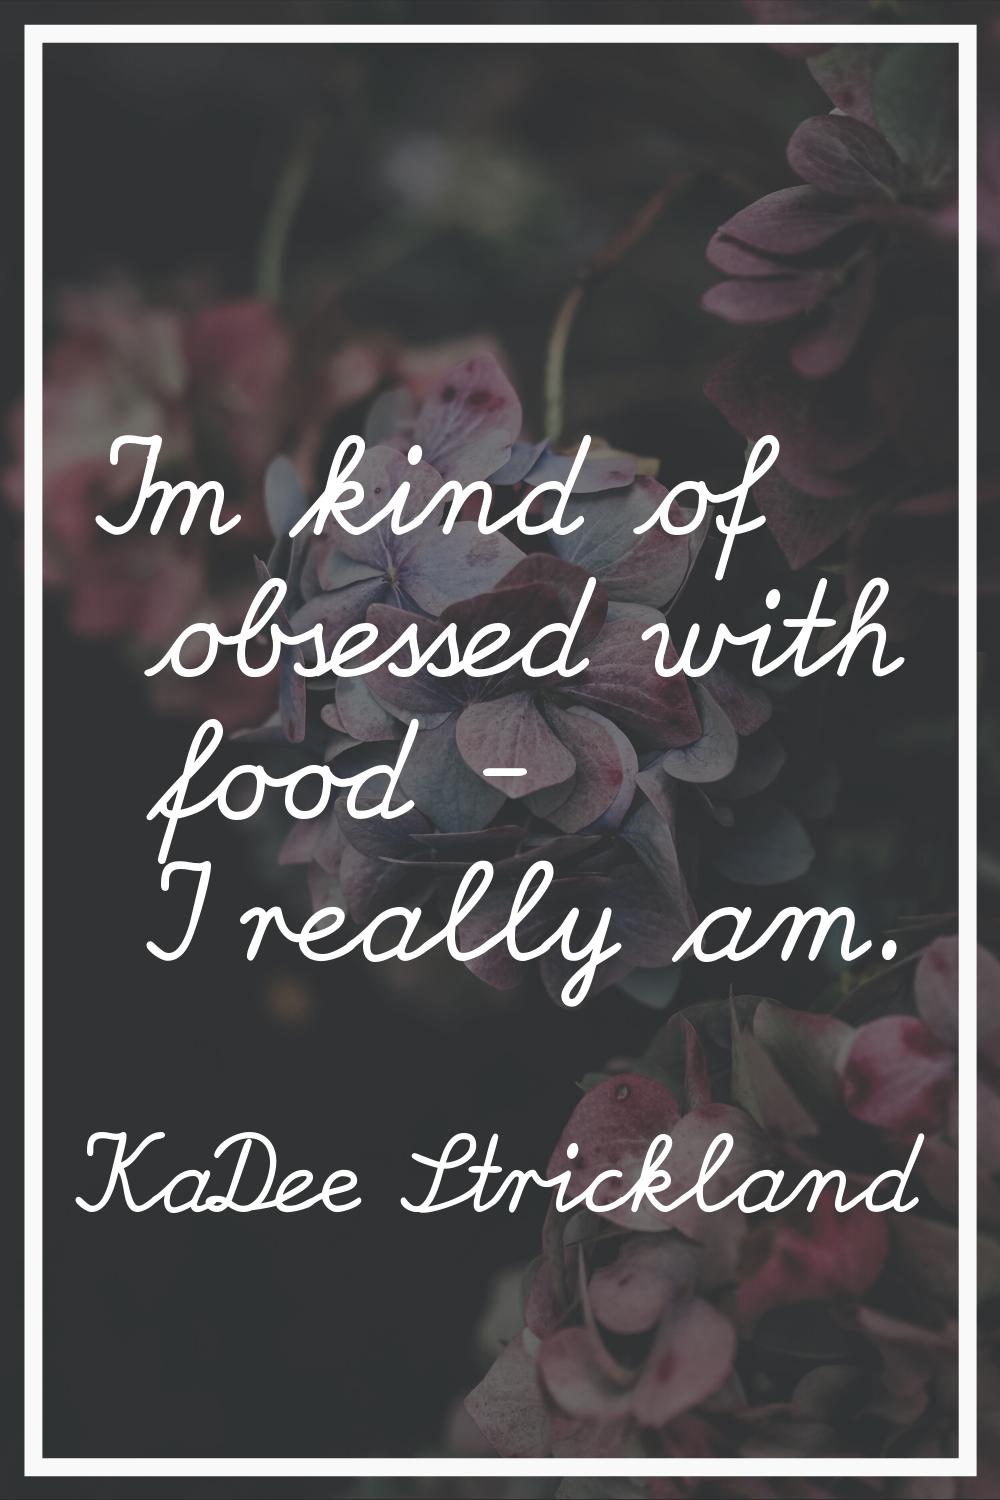 I'm kind of obsessed with food - I really am.